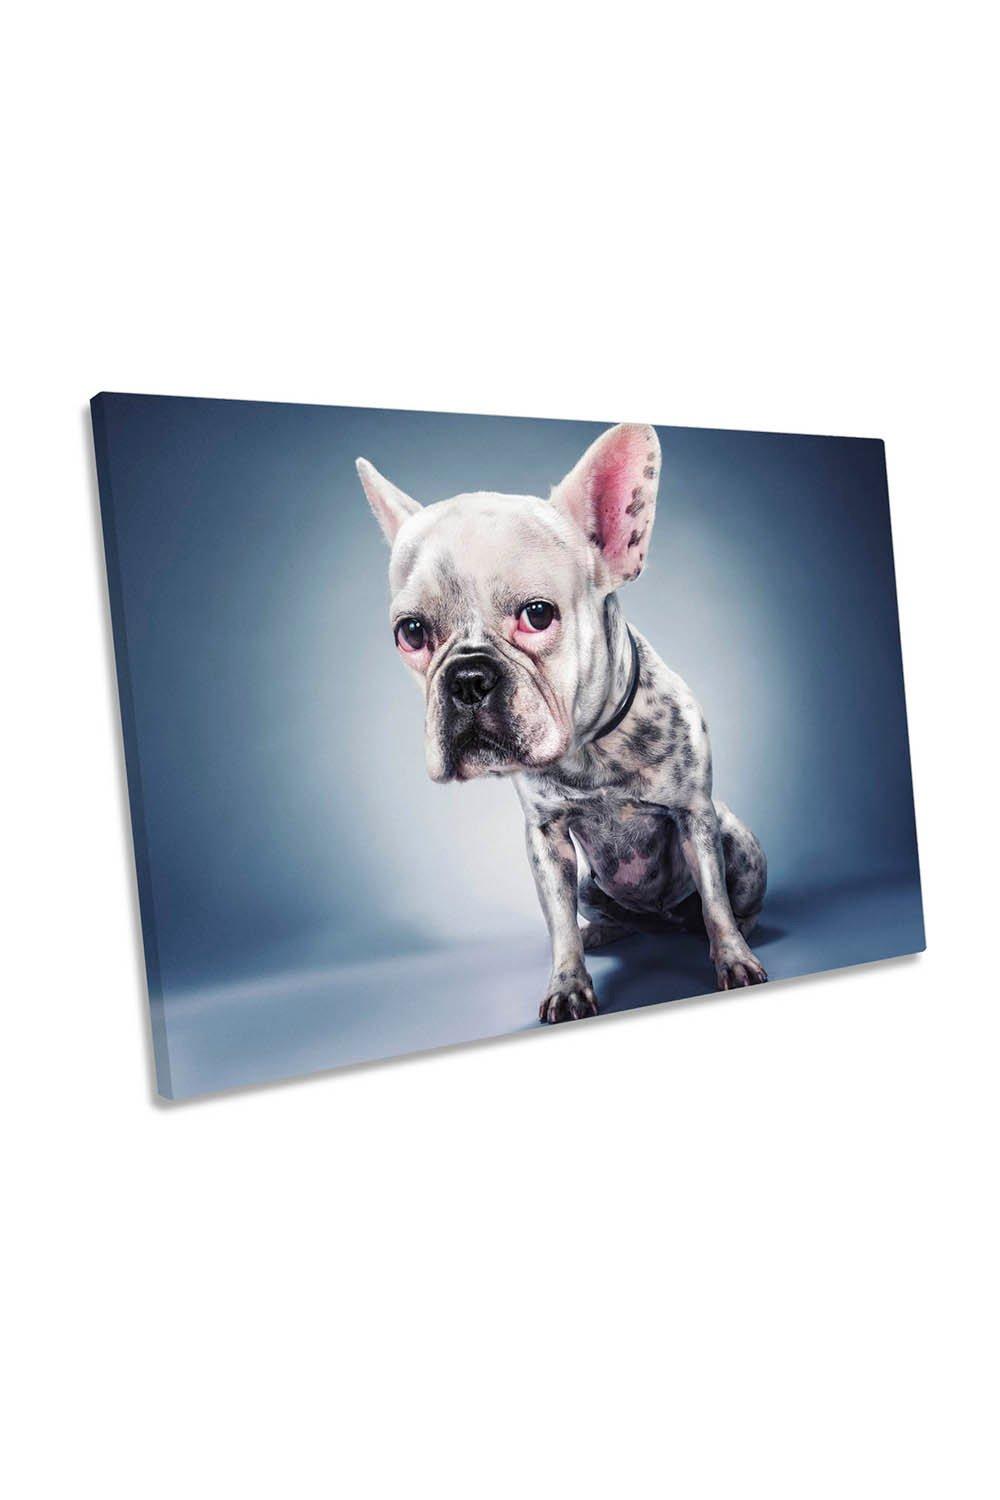 French Bulldog Big Ears Canvas Wall Art Picture Print